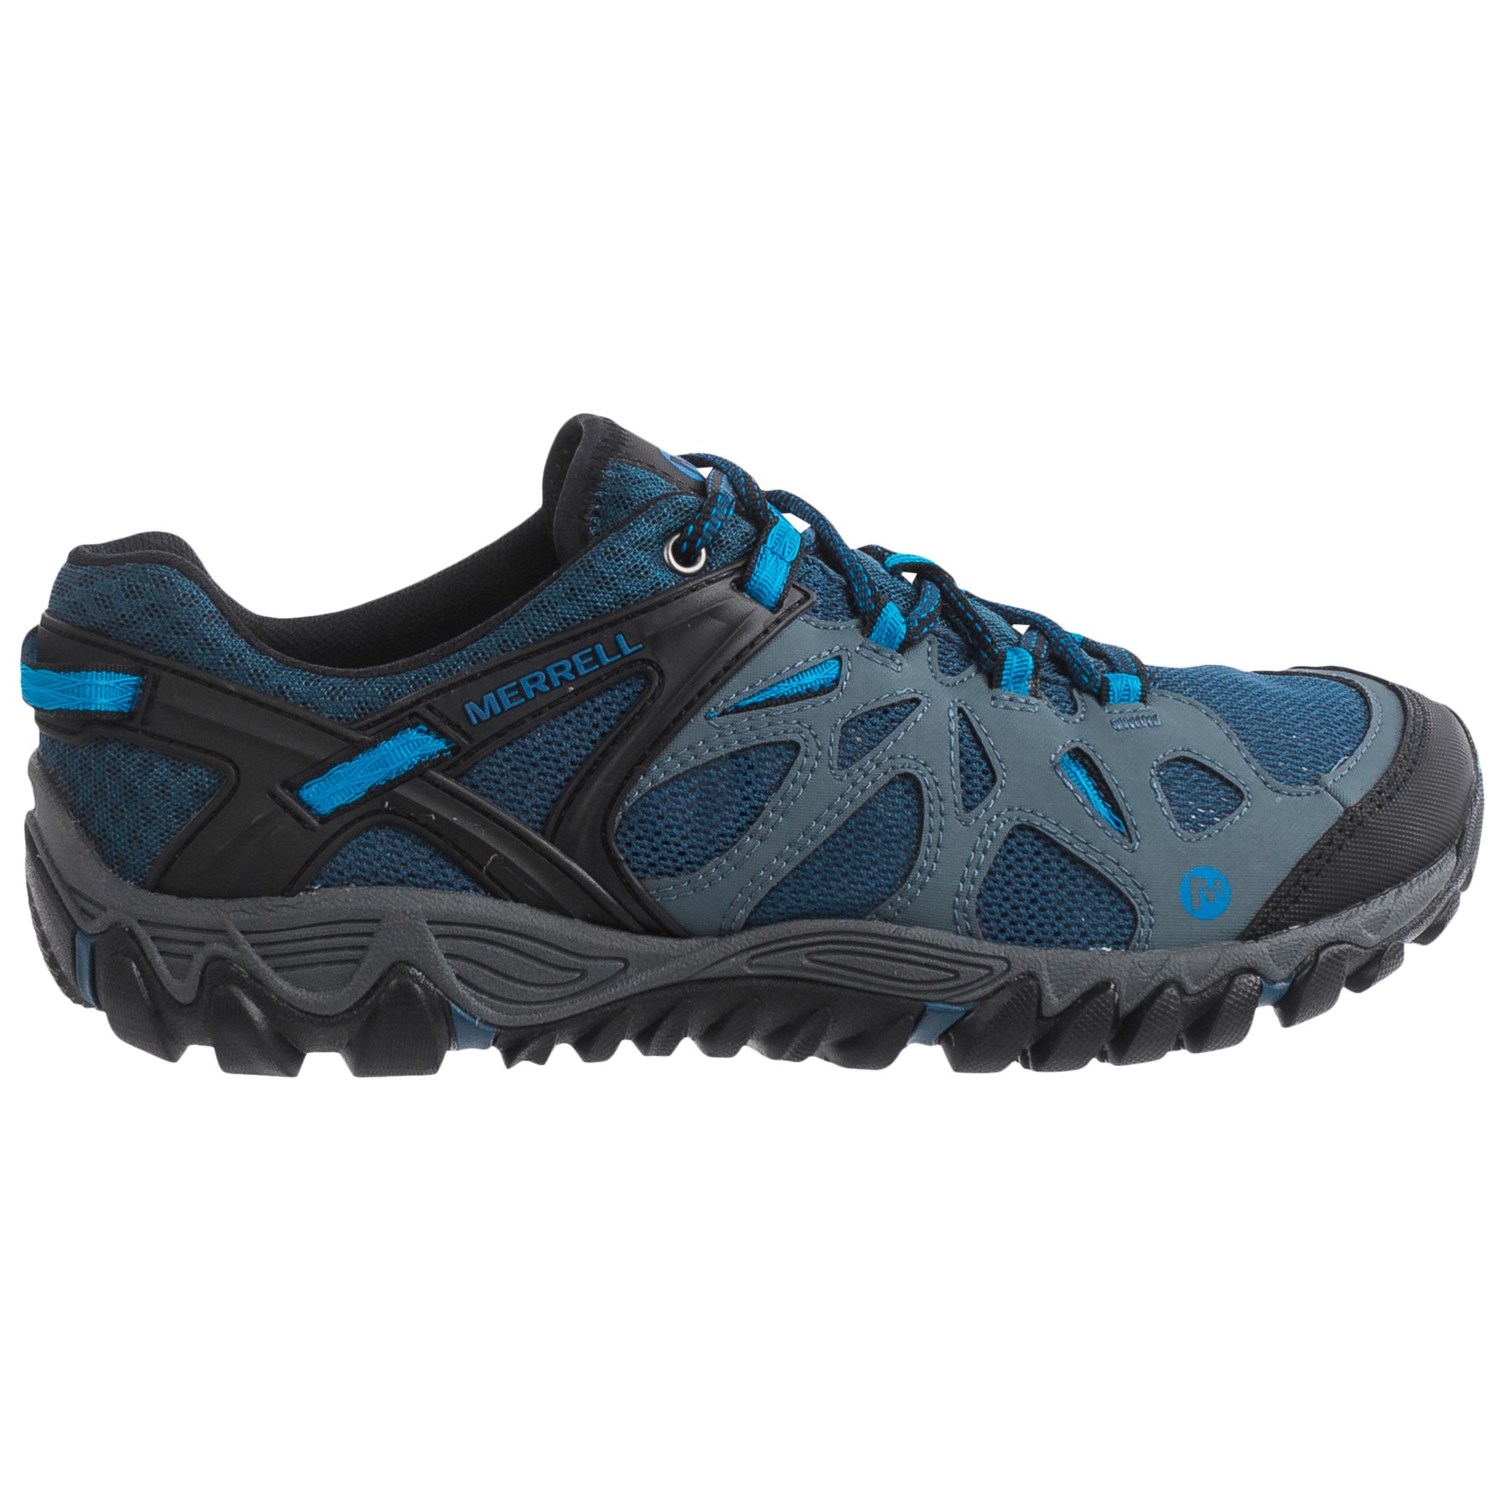 Merrell All Out Blaze Aerosport Hiking Shoes (For Men) - Save 45%